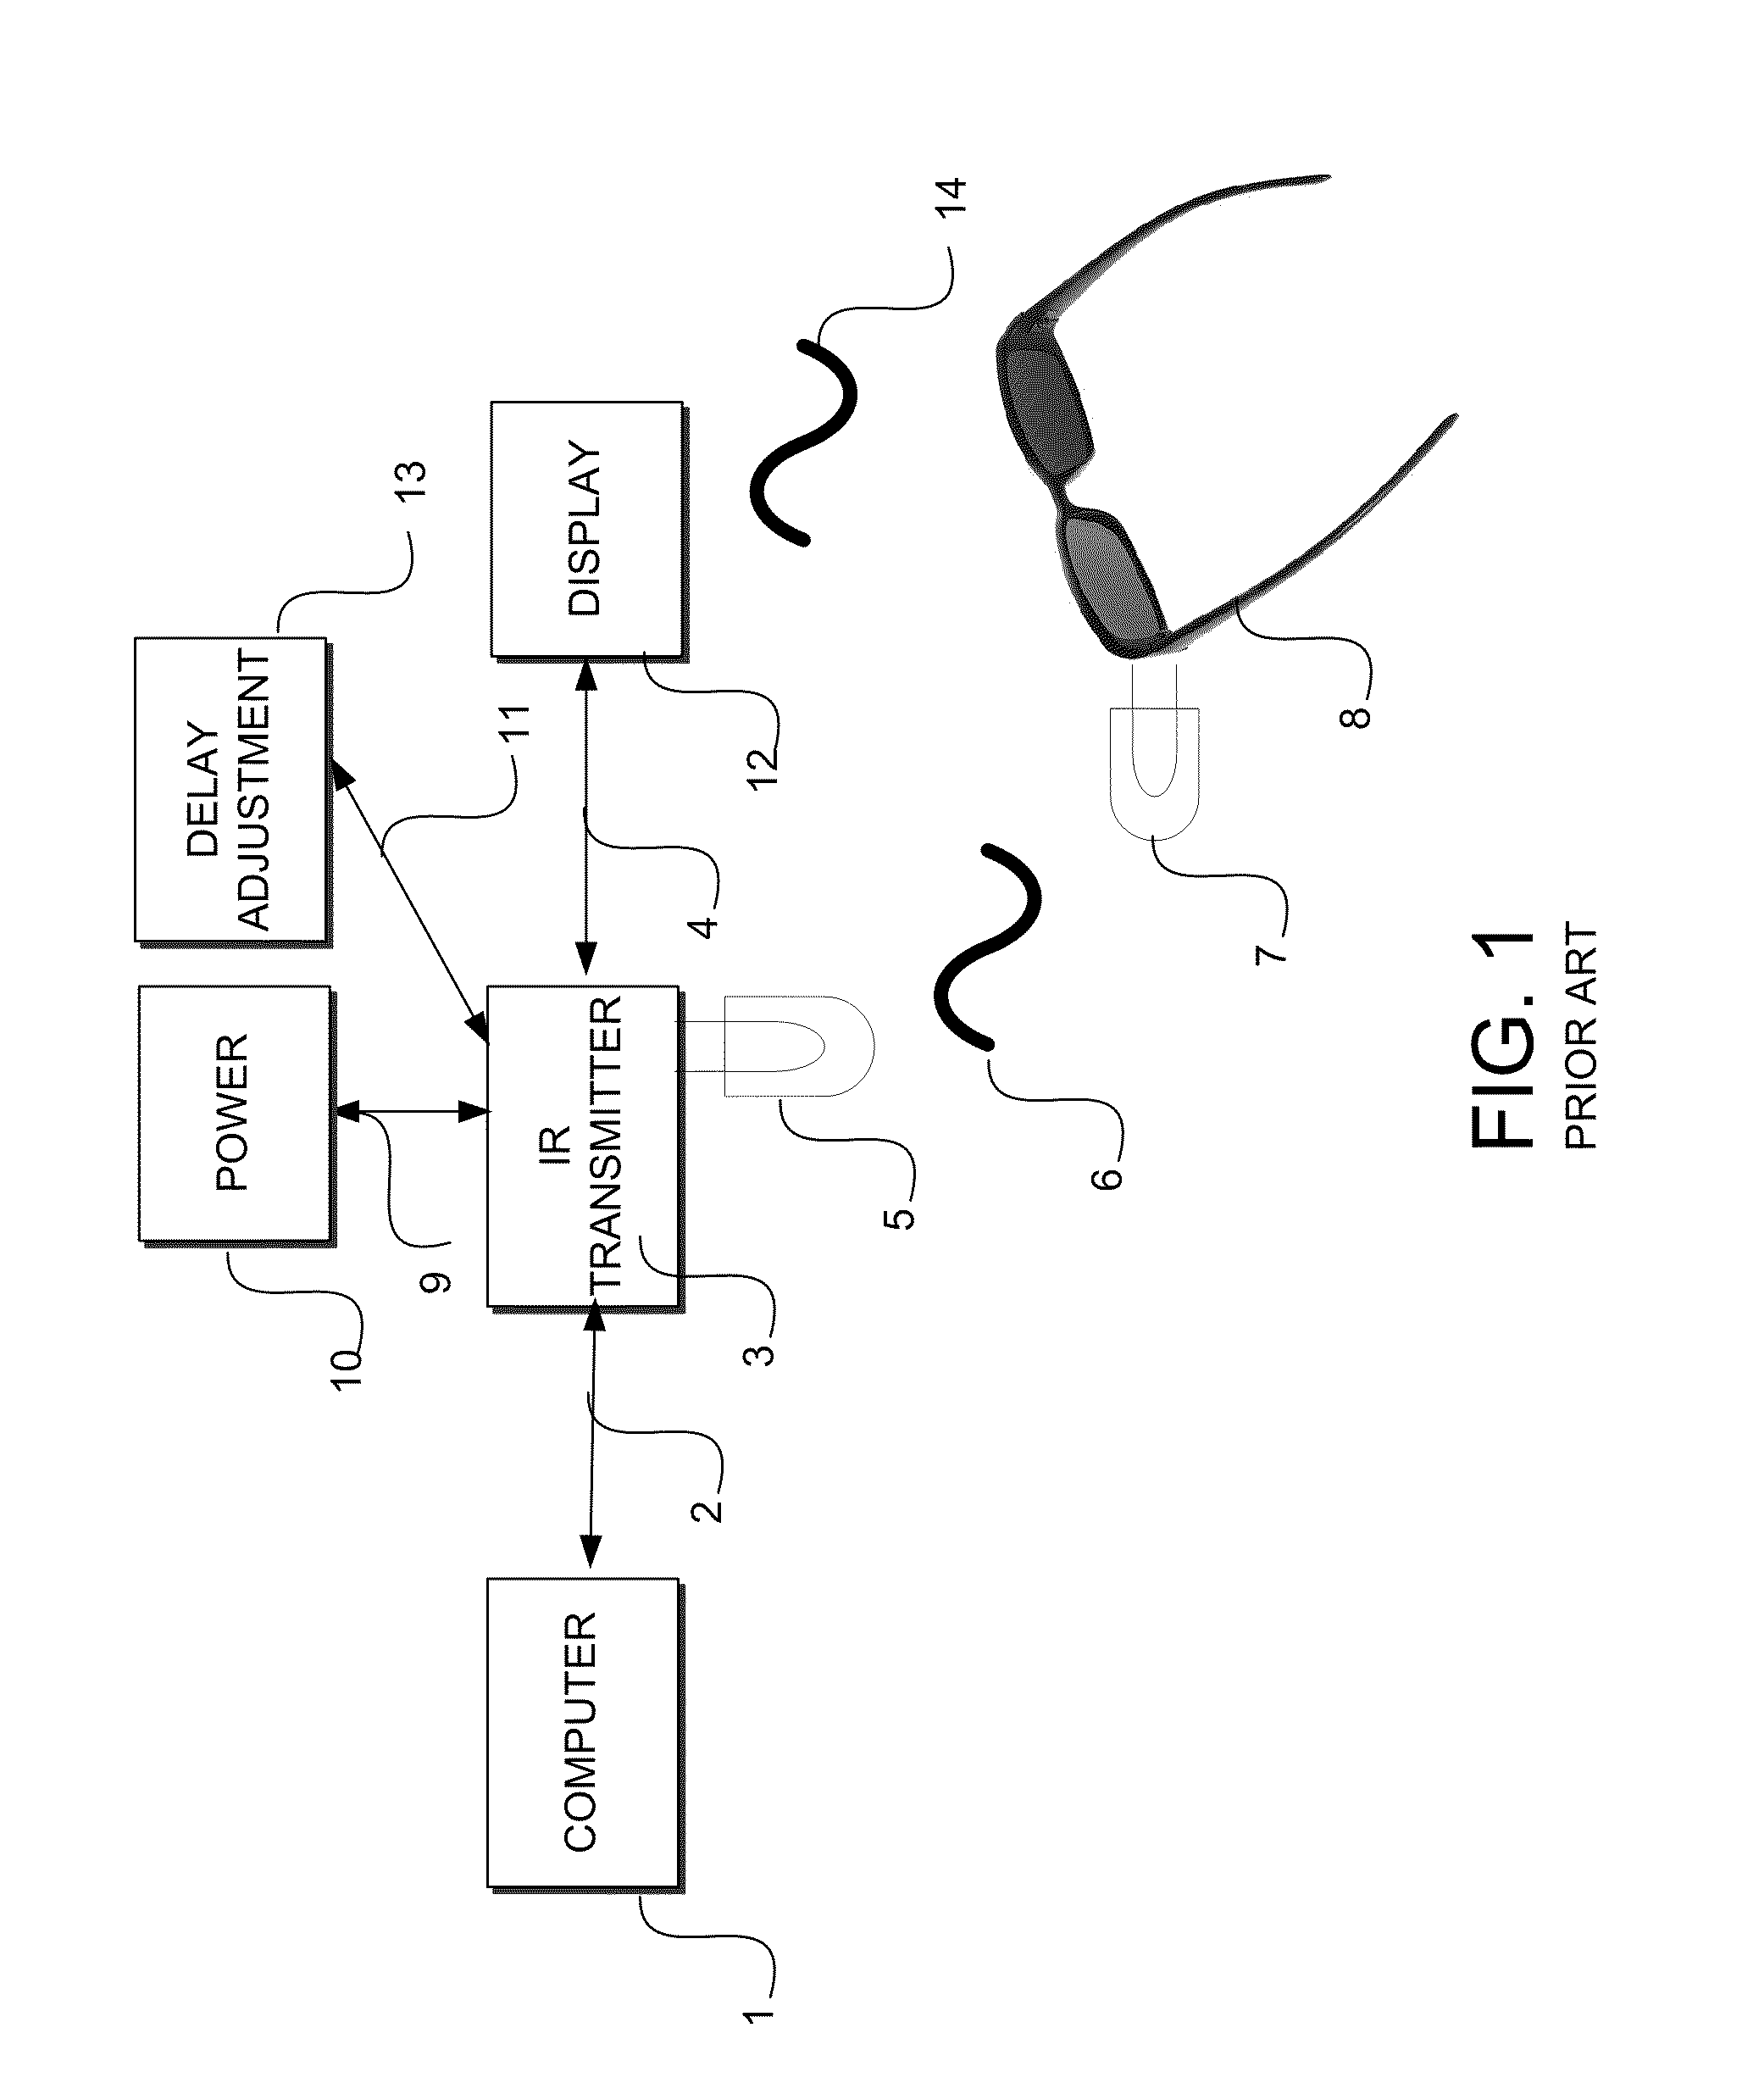 Method of stereoscopic 3D viewing using wireless or multiple protocol capable shutter glasses